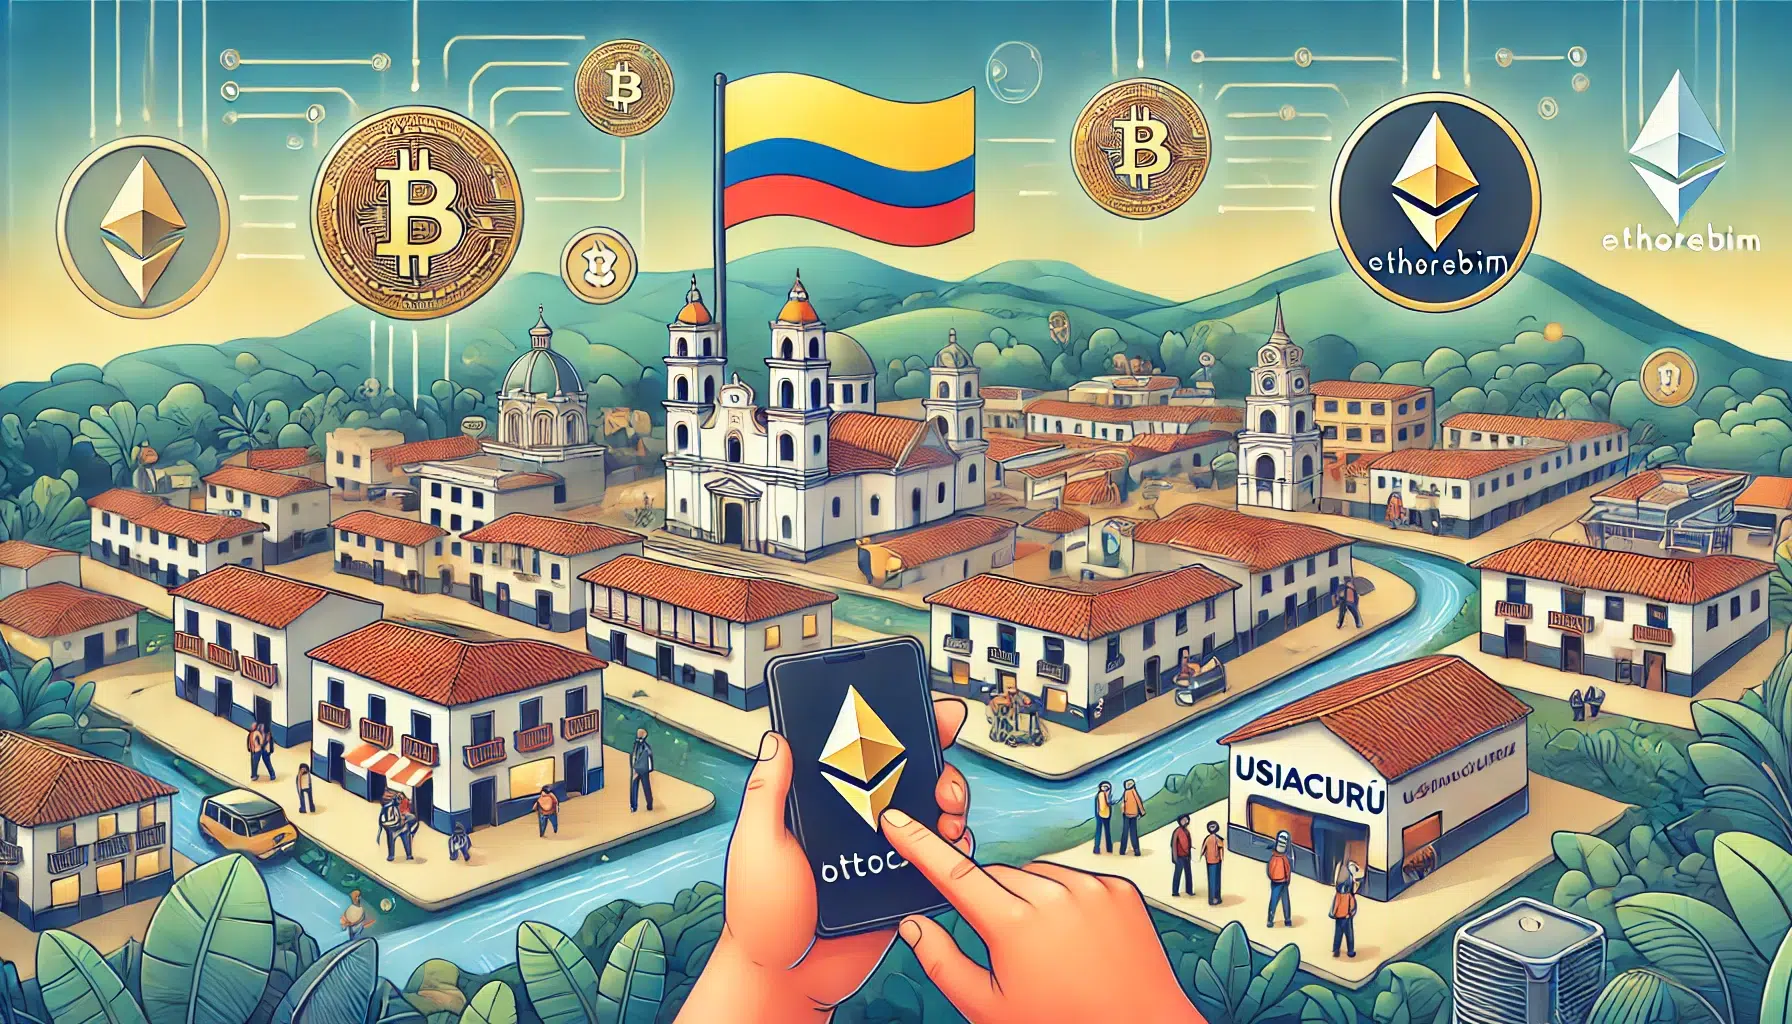 Usiacurí Pioneers Cryptocurrency Integration in Colombia with the Crypto District Initiative